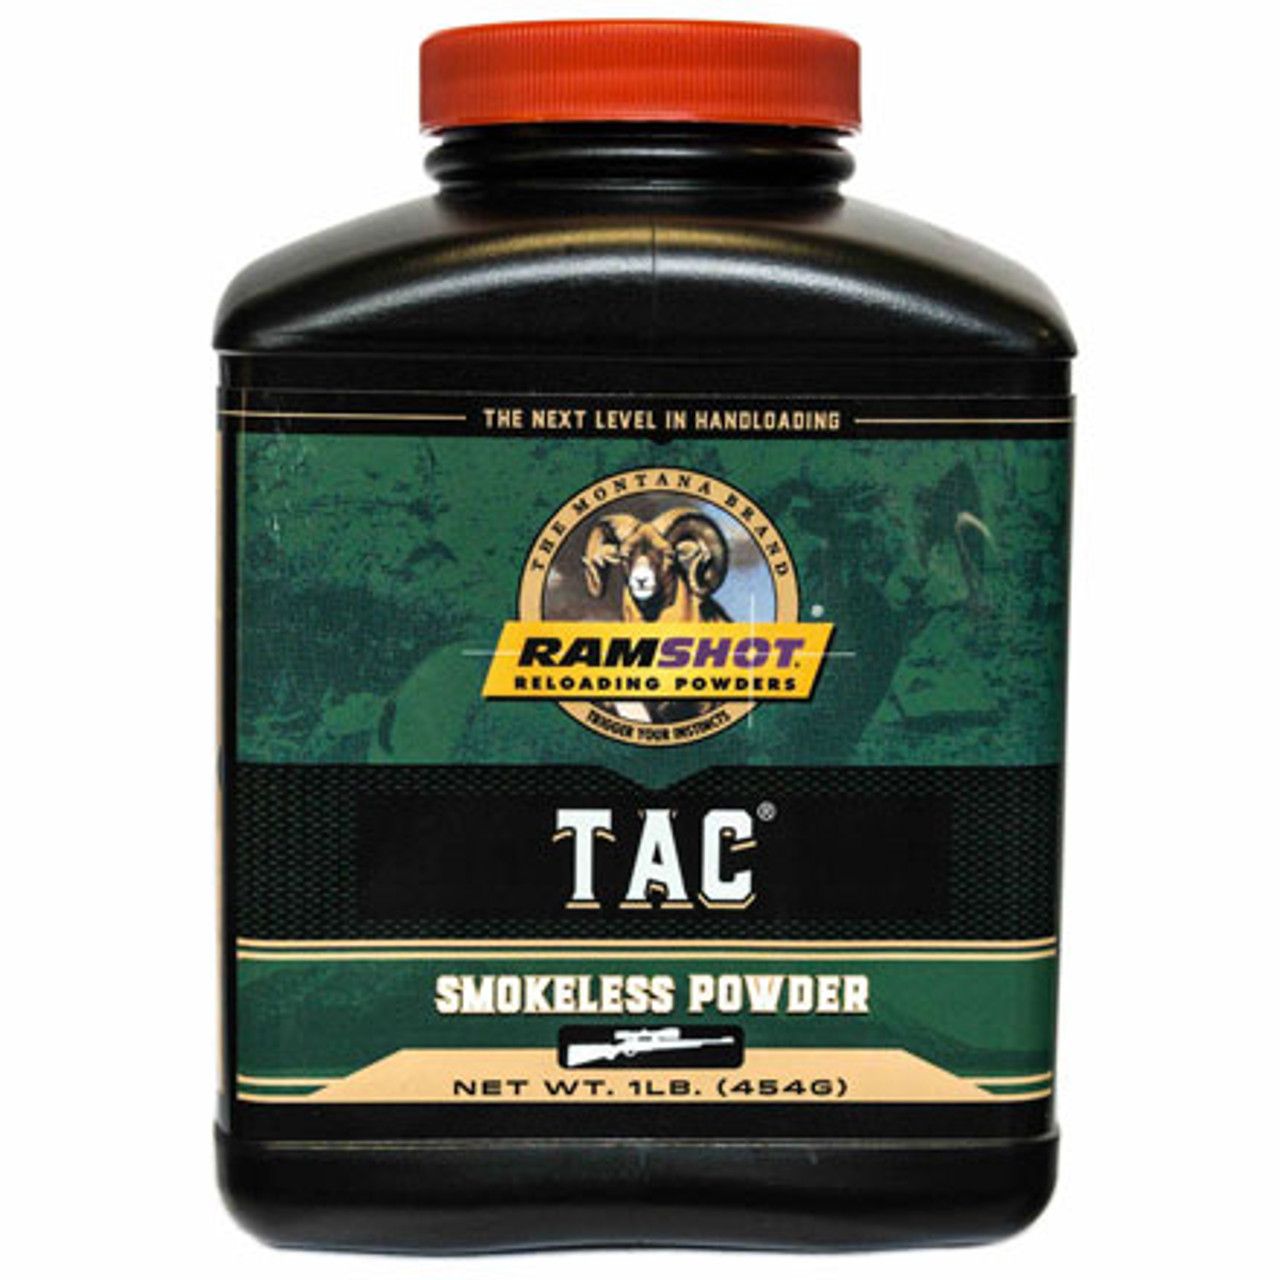 DESCRIPTION
Ramshot TAC Smokeless Rifle Powder (1 Lb)
by WESTERN & ACCURATE POWDER

Ramshot TAC is a versatile rifle powder that performs well in a number of different calibers. TAC has the ability to provide some of the industry's highest velocities for 80 grain bullets in the .223 caliber while maintaining SAAMI pressure guidelines. Ramshot TAC rifle powder is a double-based reloading smokeless powder providing for ease of metering and consistent charge weights. Ideal Calibers: .223 Rem, 308 Win. Grain shape is flat ball.